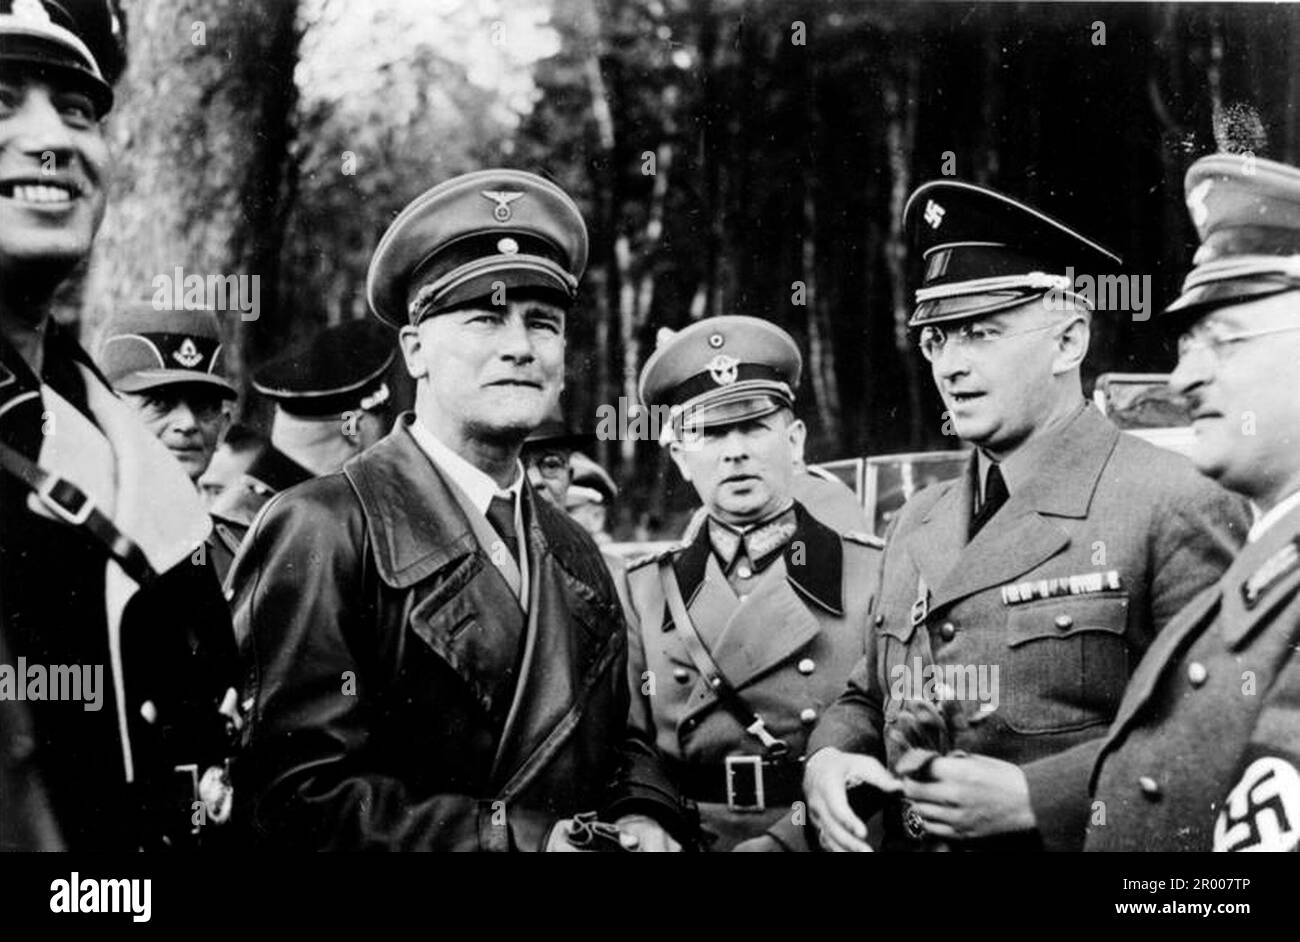 The nazi minister of the interior Wilhelm Frick with other prominent nazis during an official visit to Czechoslovakia after the annexation of the Sudetenland. After the annexation of Austria, Hitler demanded that he be given the Sudeten region of Czechoslovakia. At the Munich conference in September 1938 the Western powers agreed to this and the nazis occupied the area. Not long after Hitler broke his promise and invaded the rest of Czechoslovakia before turning his attention to Poland. From left Wilhelm Stuckart, Frick, Adolf von Bomhard (head of Order Police) Konrad Henlein (Sudeten German l Stock Photo